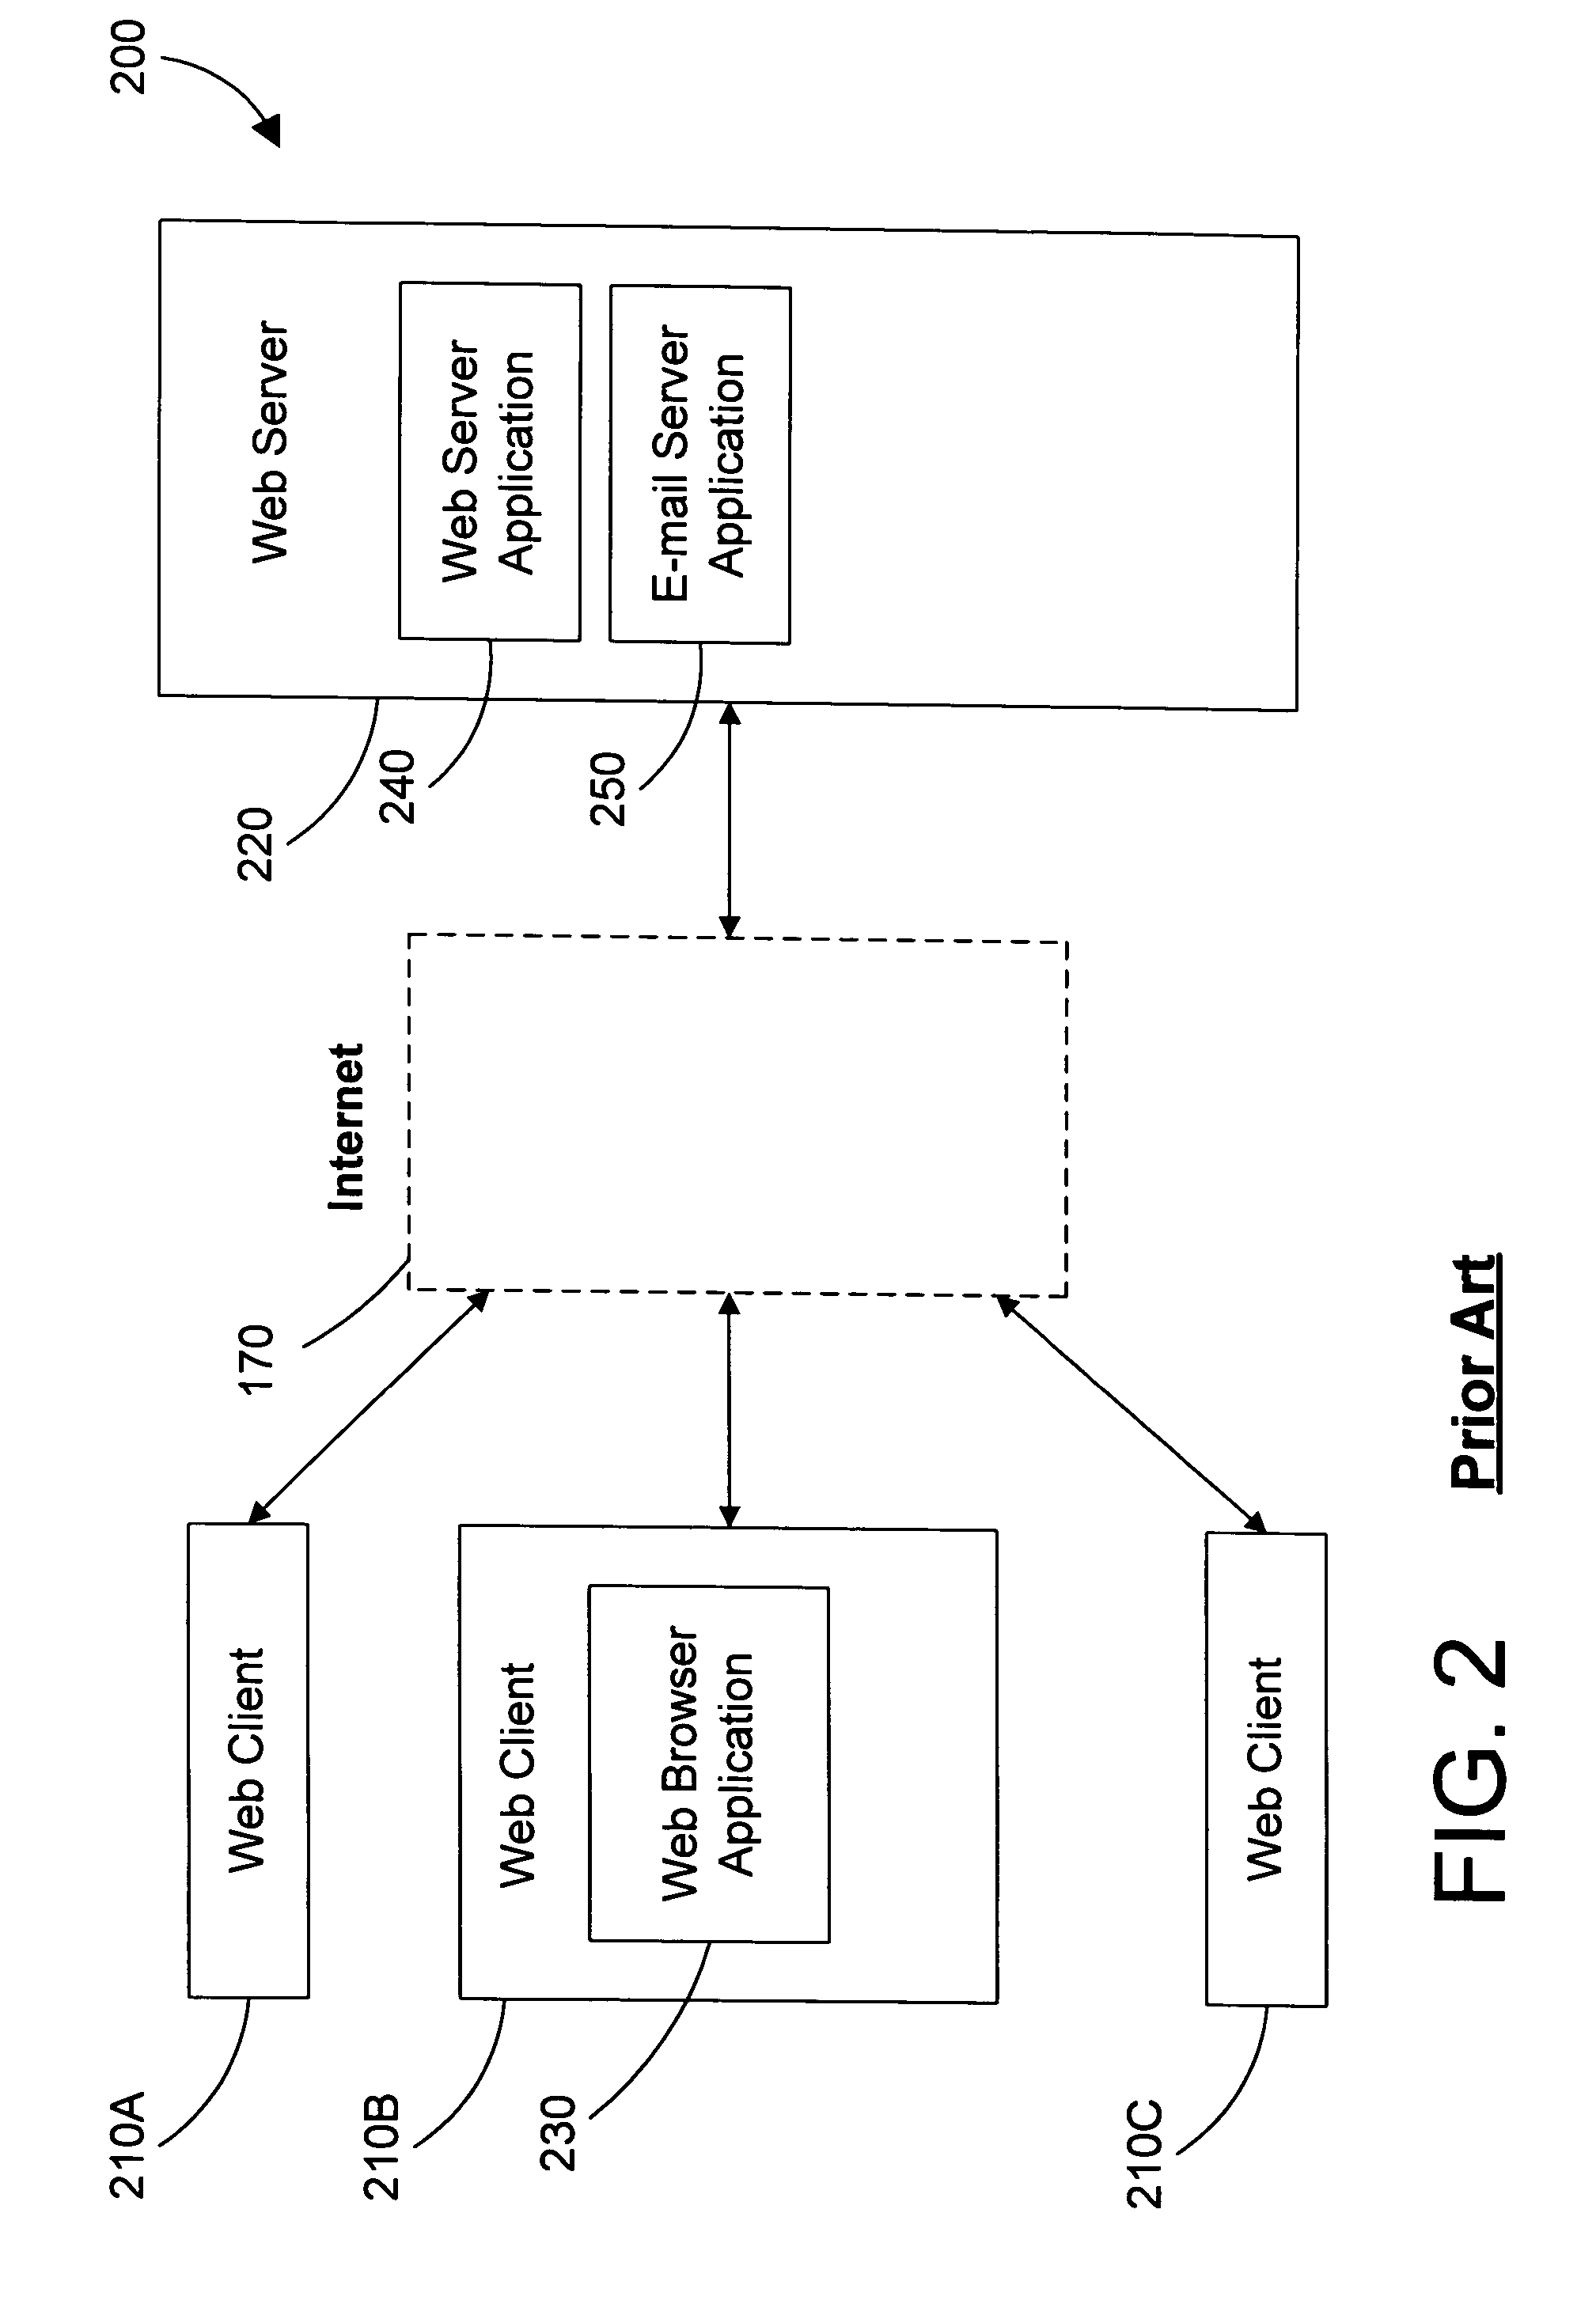 Web server apparatus and method for virus checking